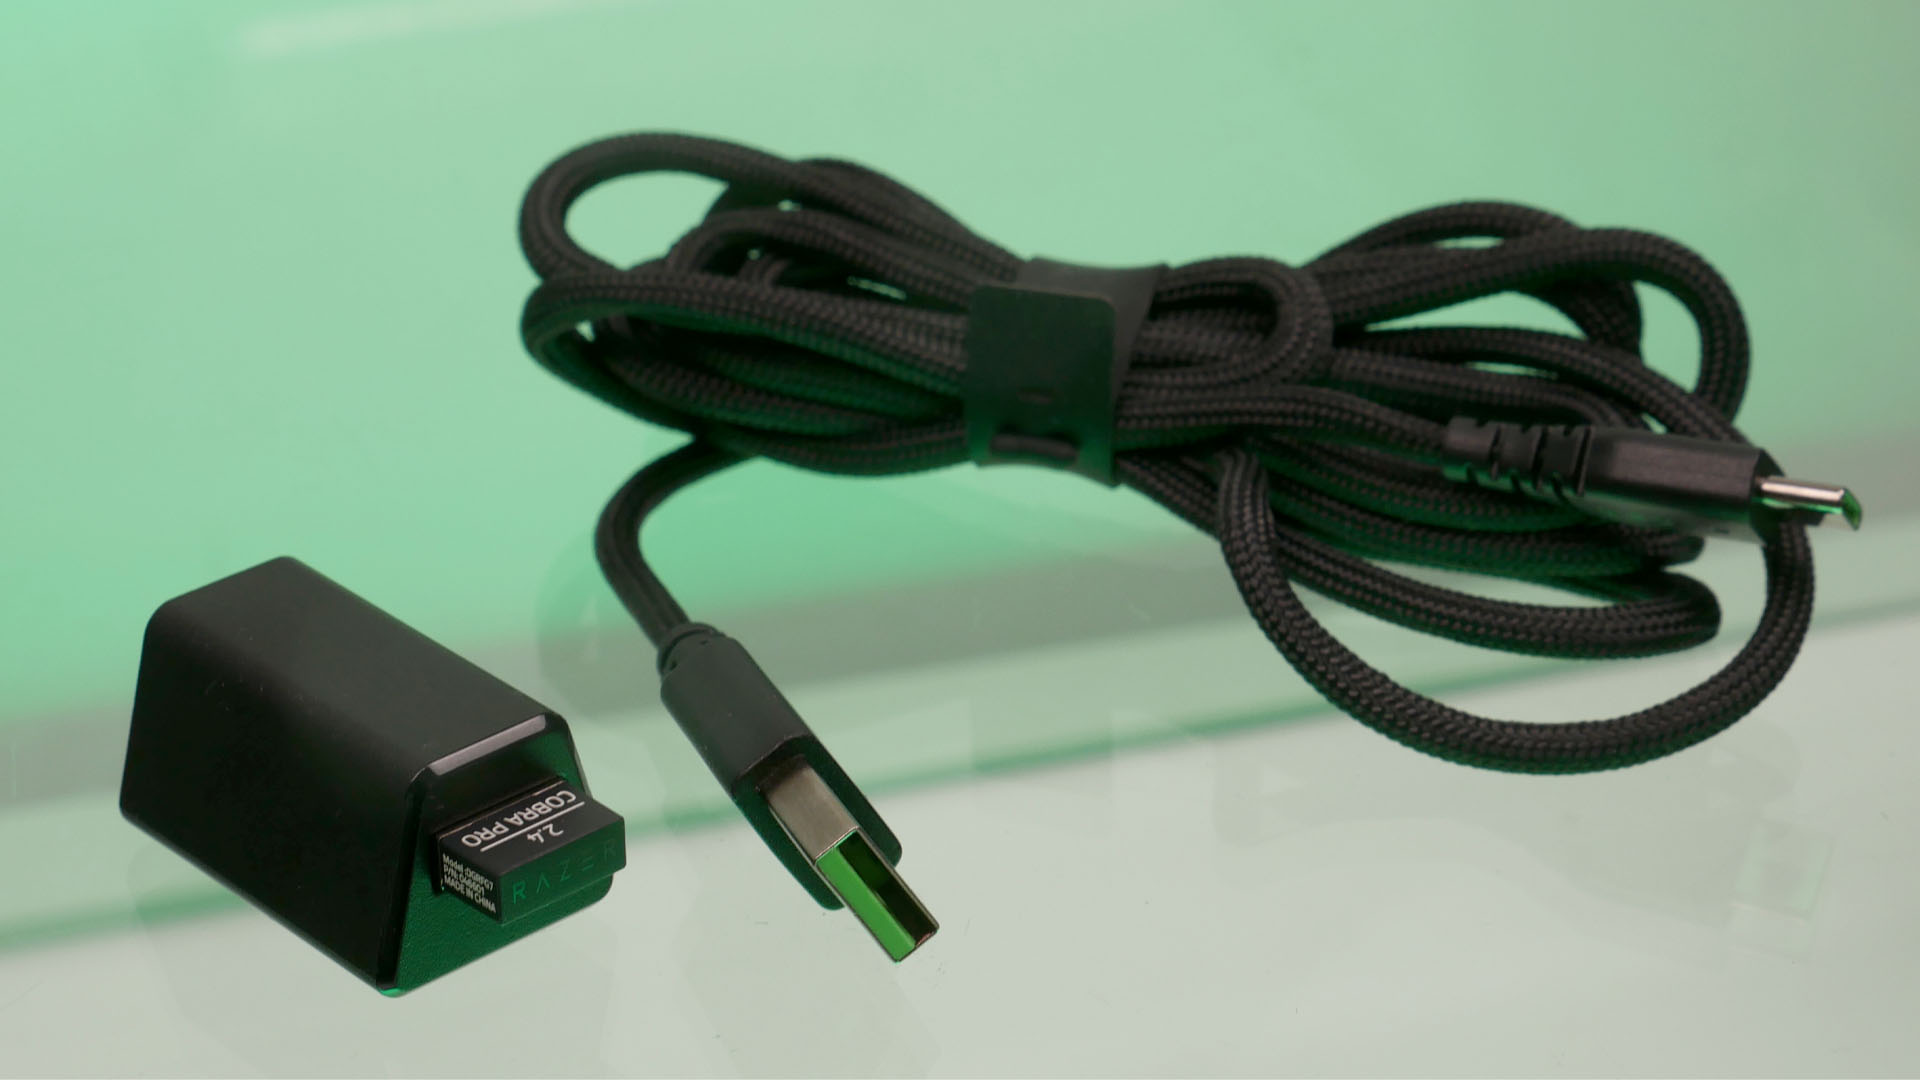 NZXT Kraken Elite 360 RGB 02 review cable and dongle